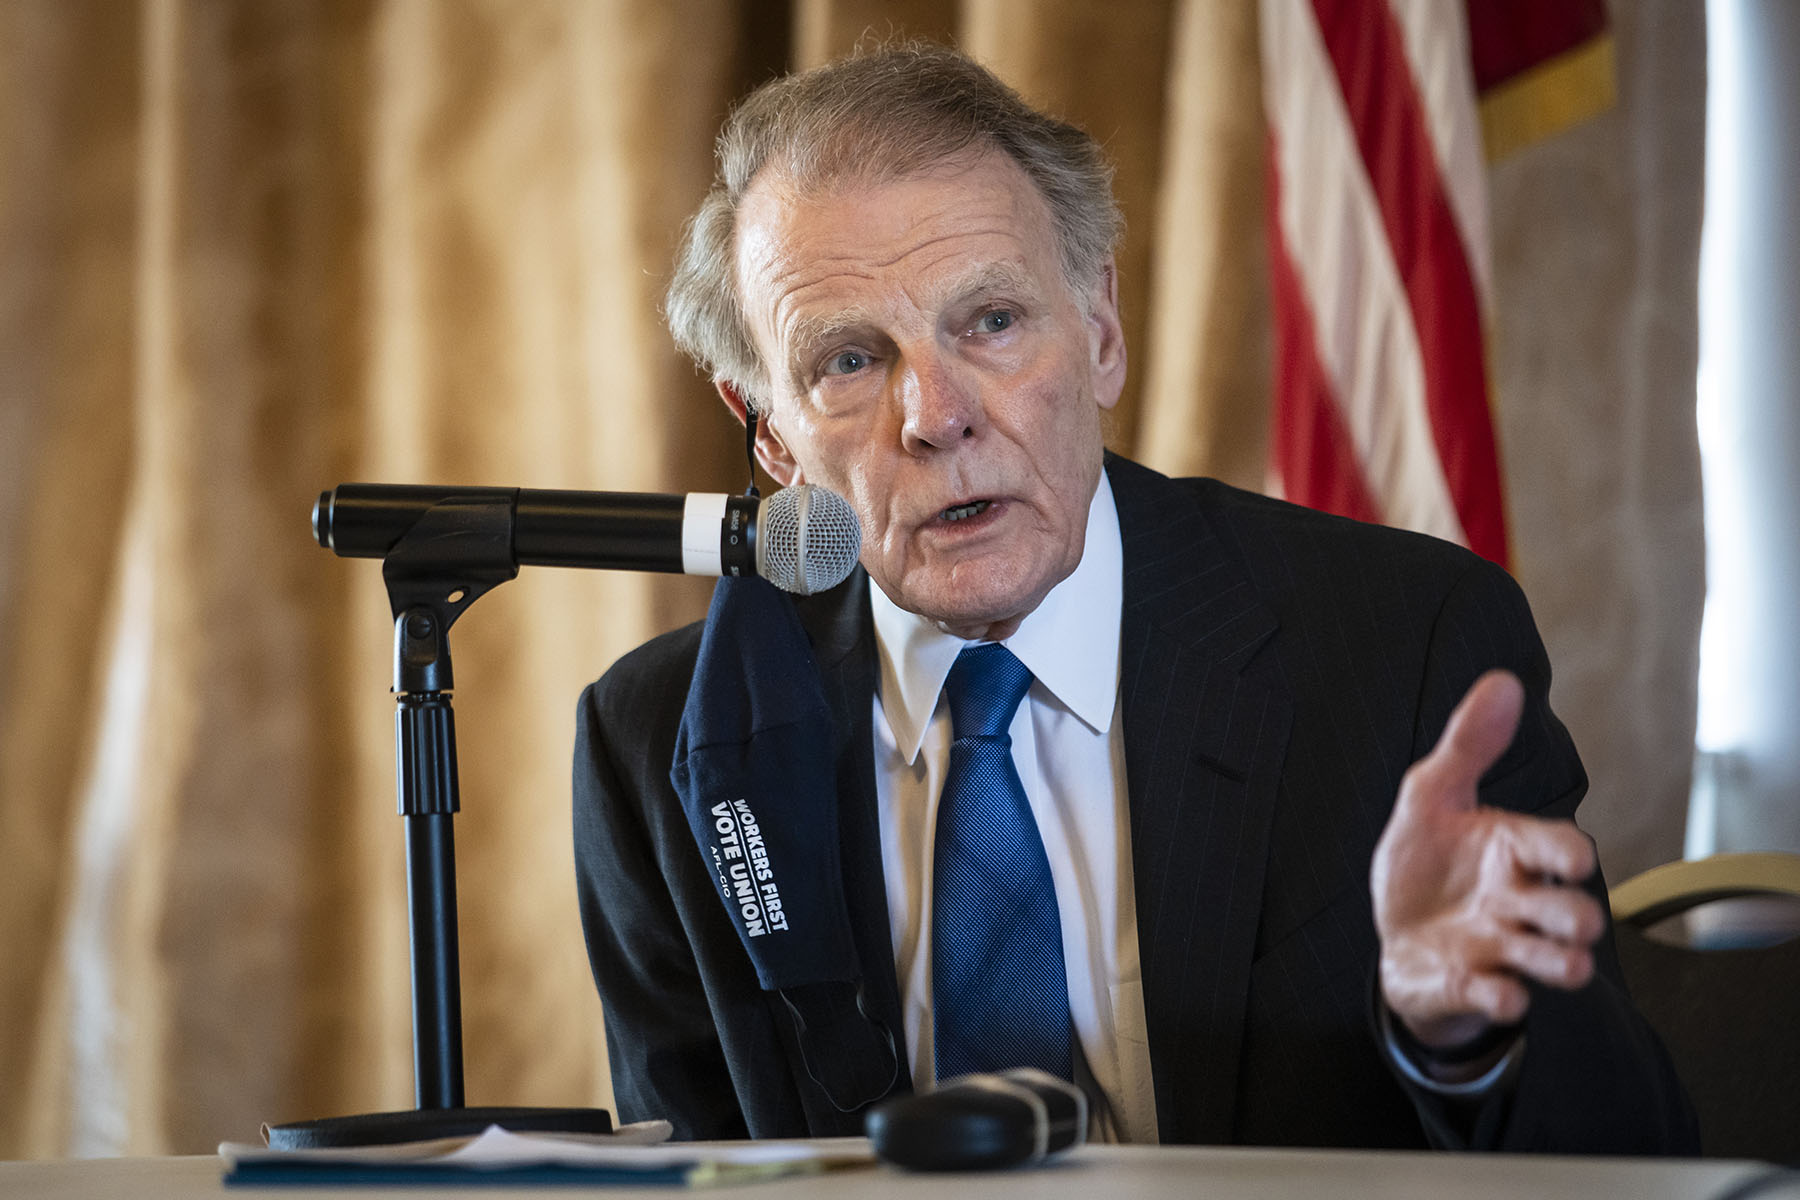 Michael Madigan speaks during a committee hearing in Chicago.